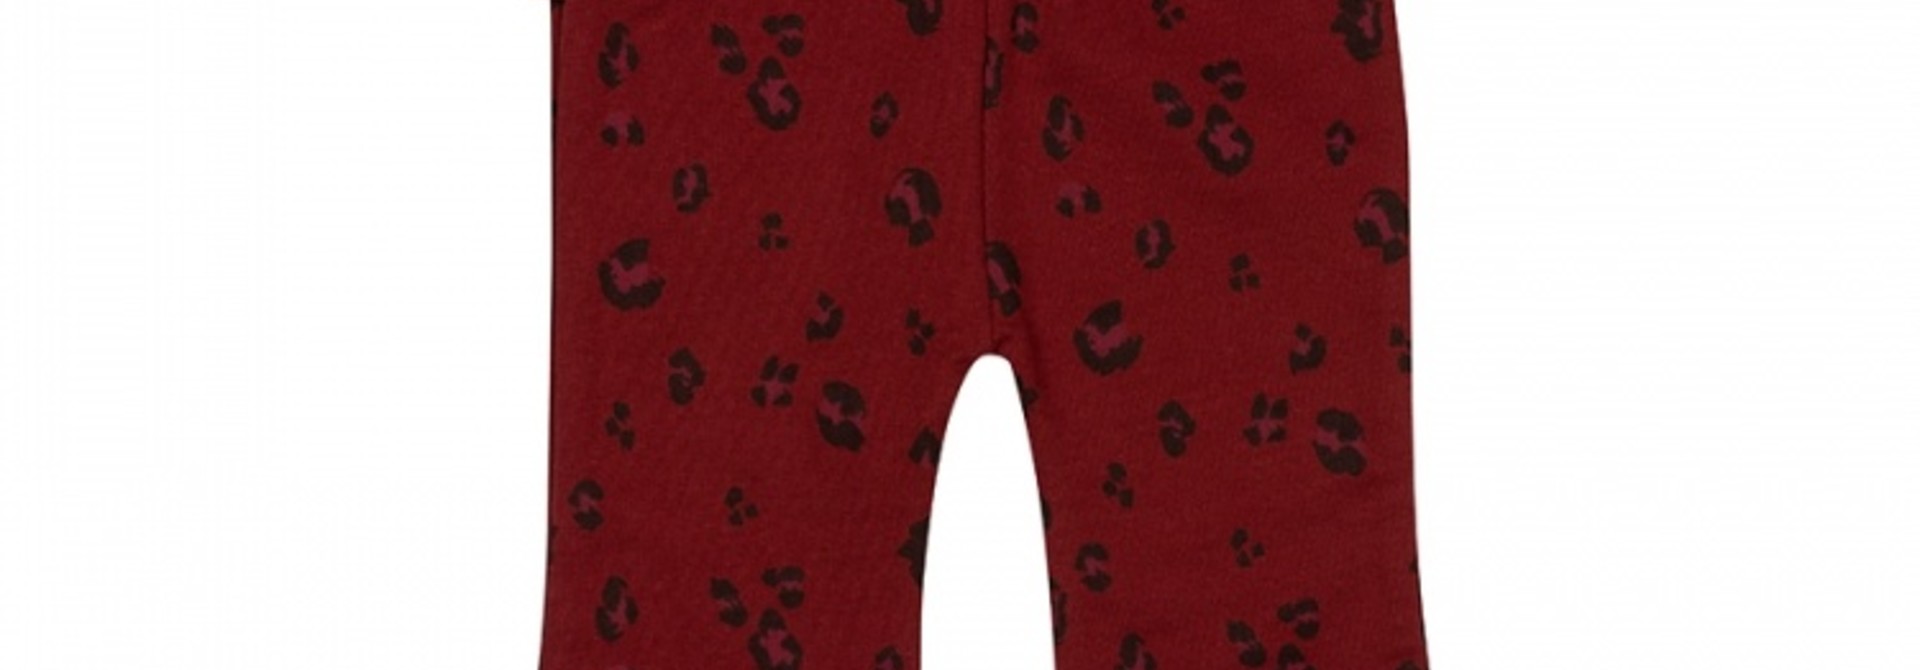 Frogs&dogs - Flair Pants Burnt Russet